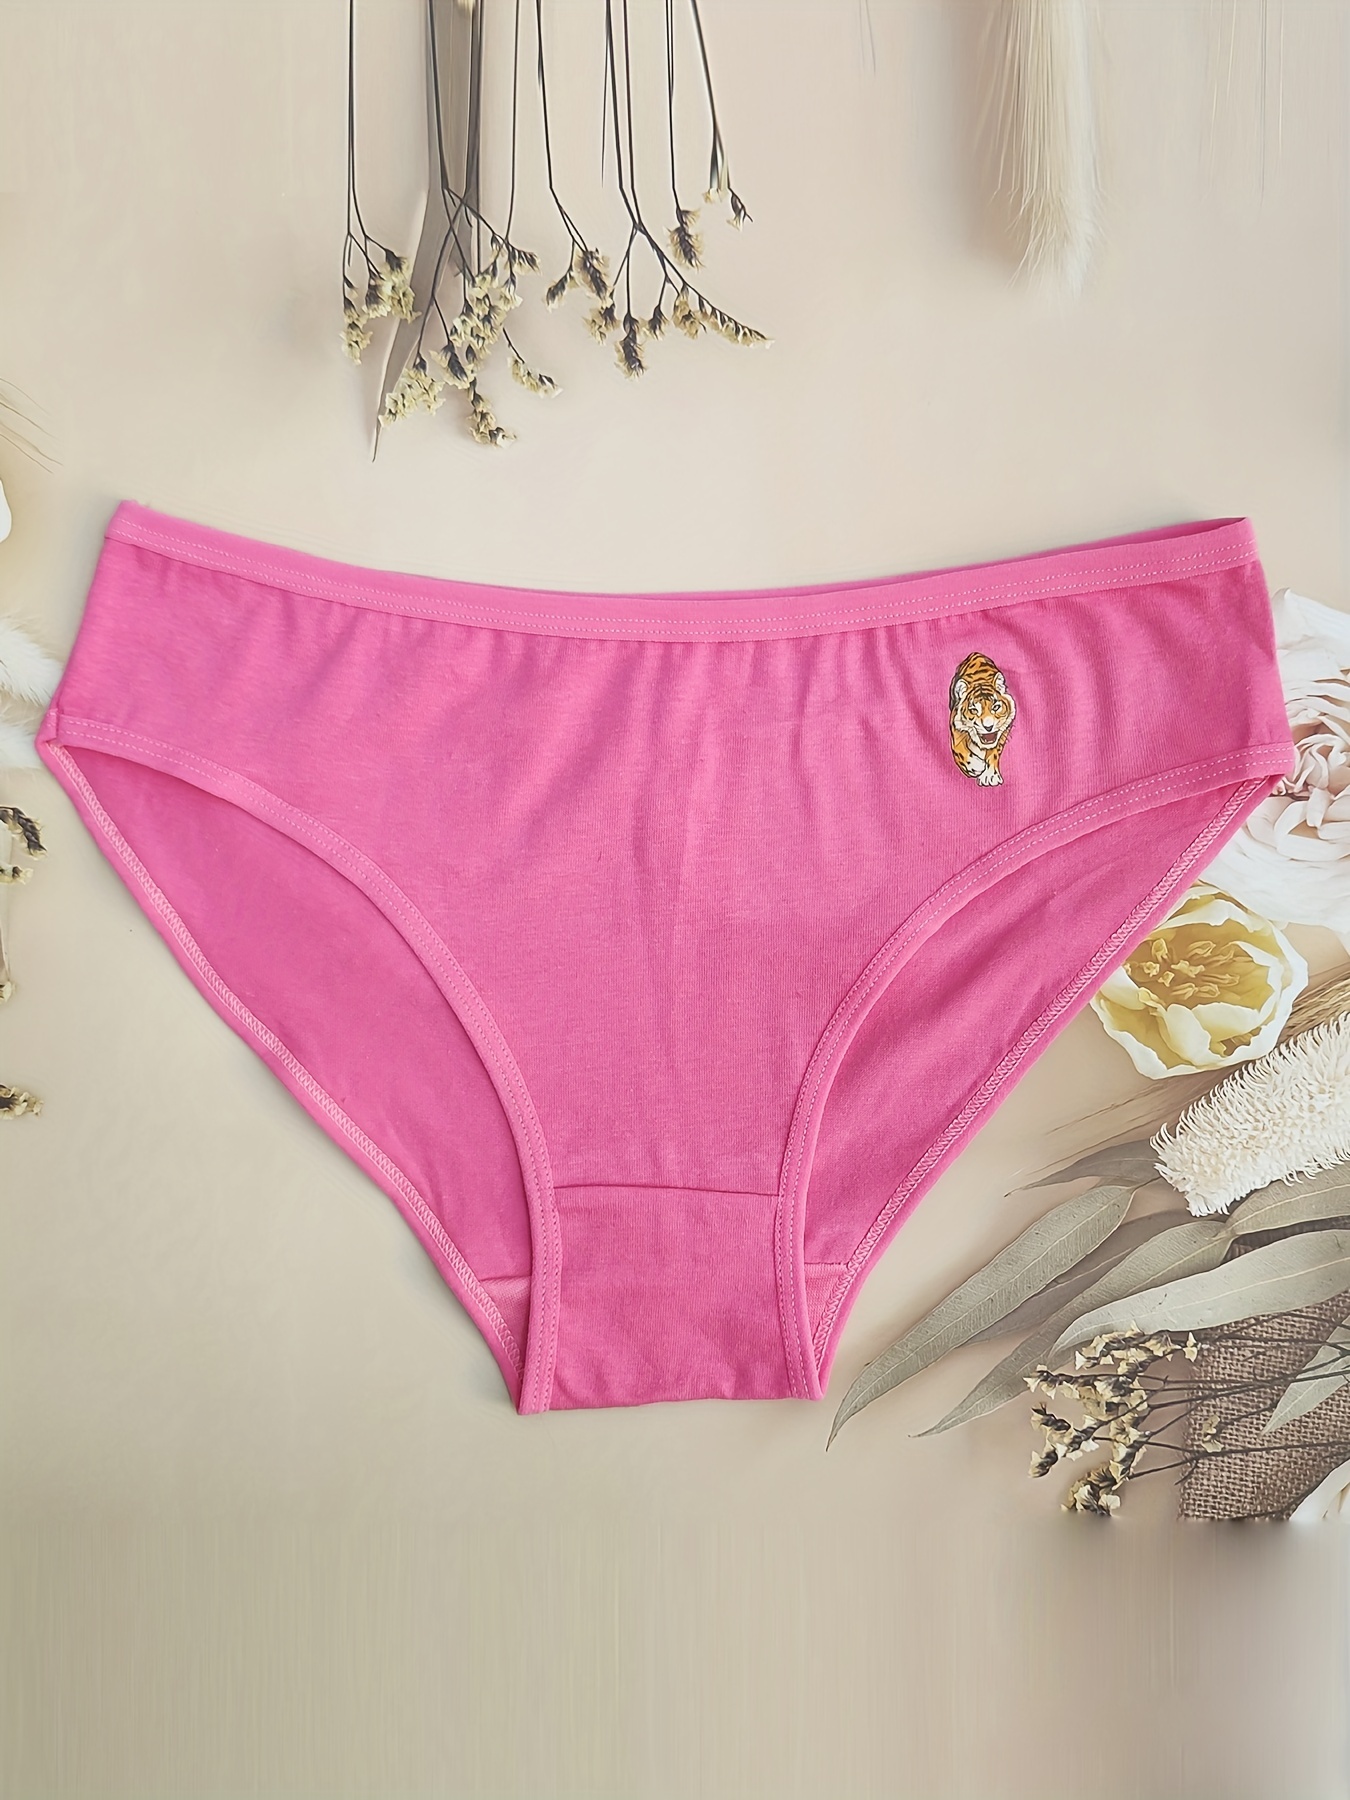 Red Rose Pink Tummy trimmer Panties